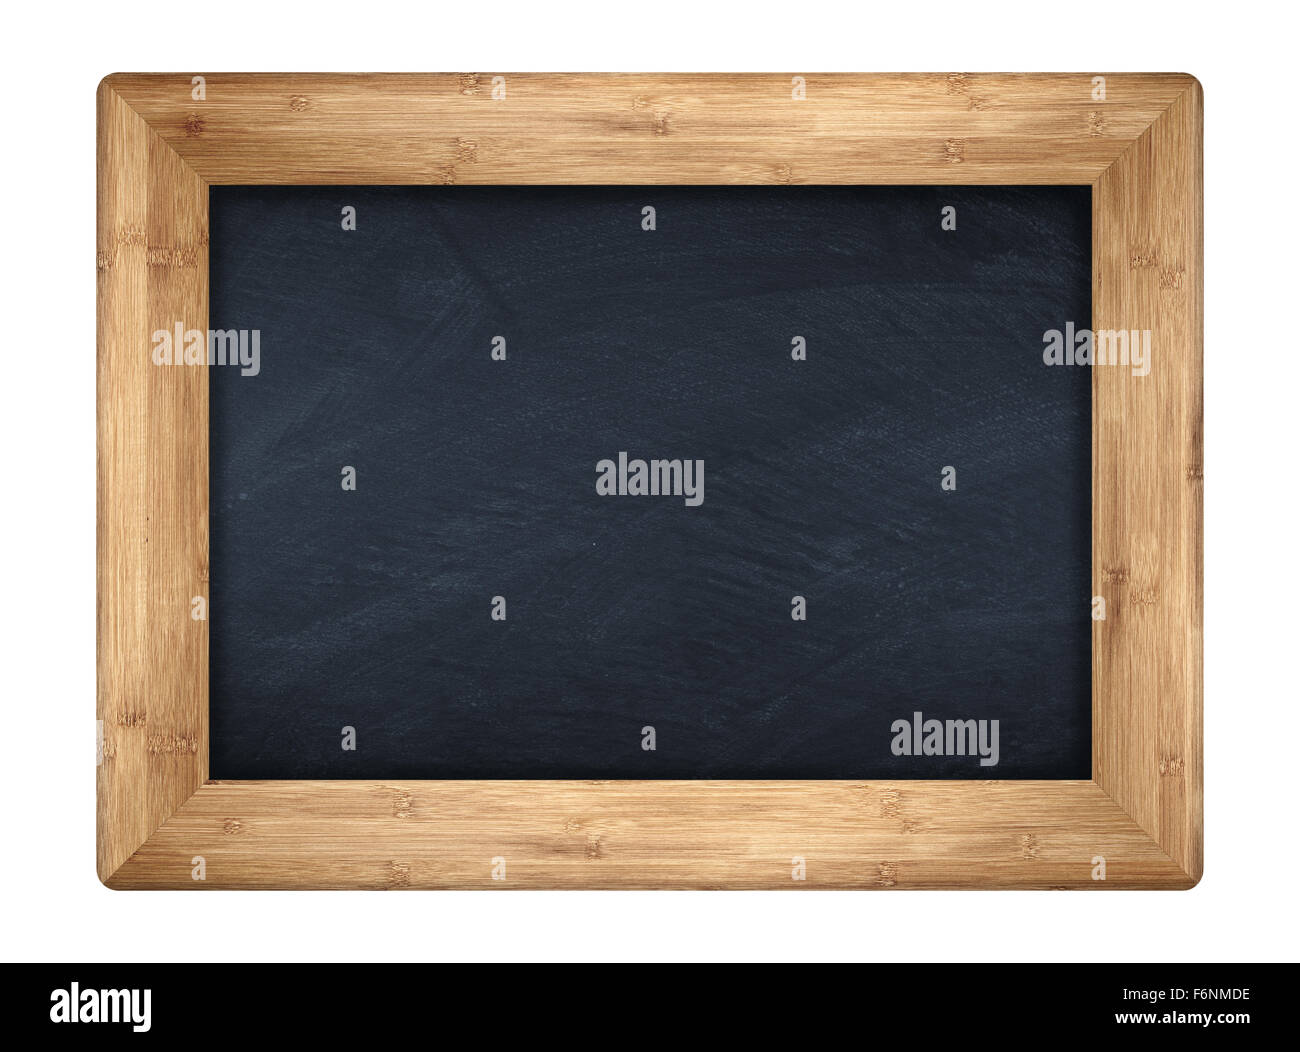 little blackboard with wooden bamboo frame Stock Photo